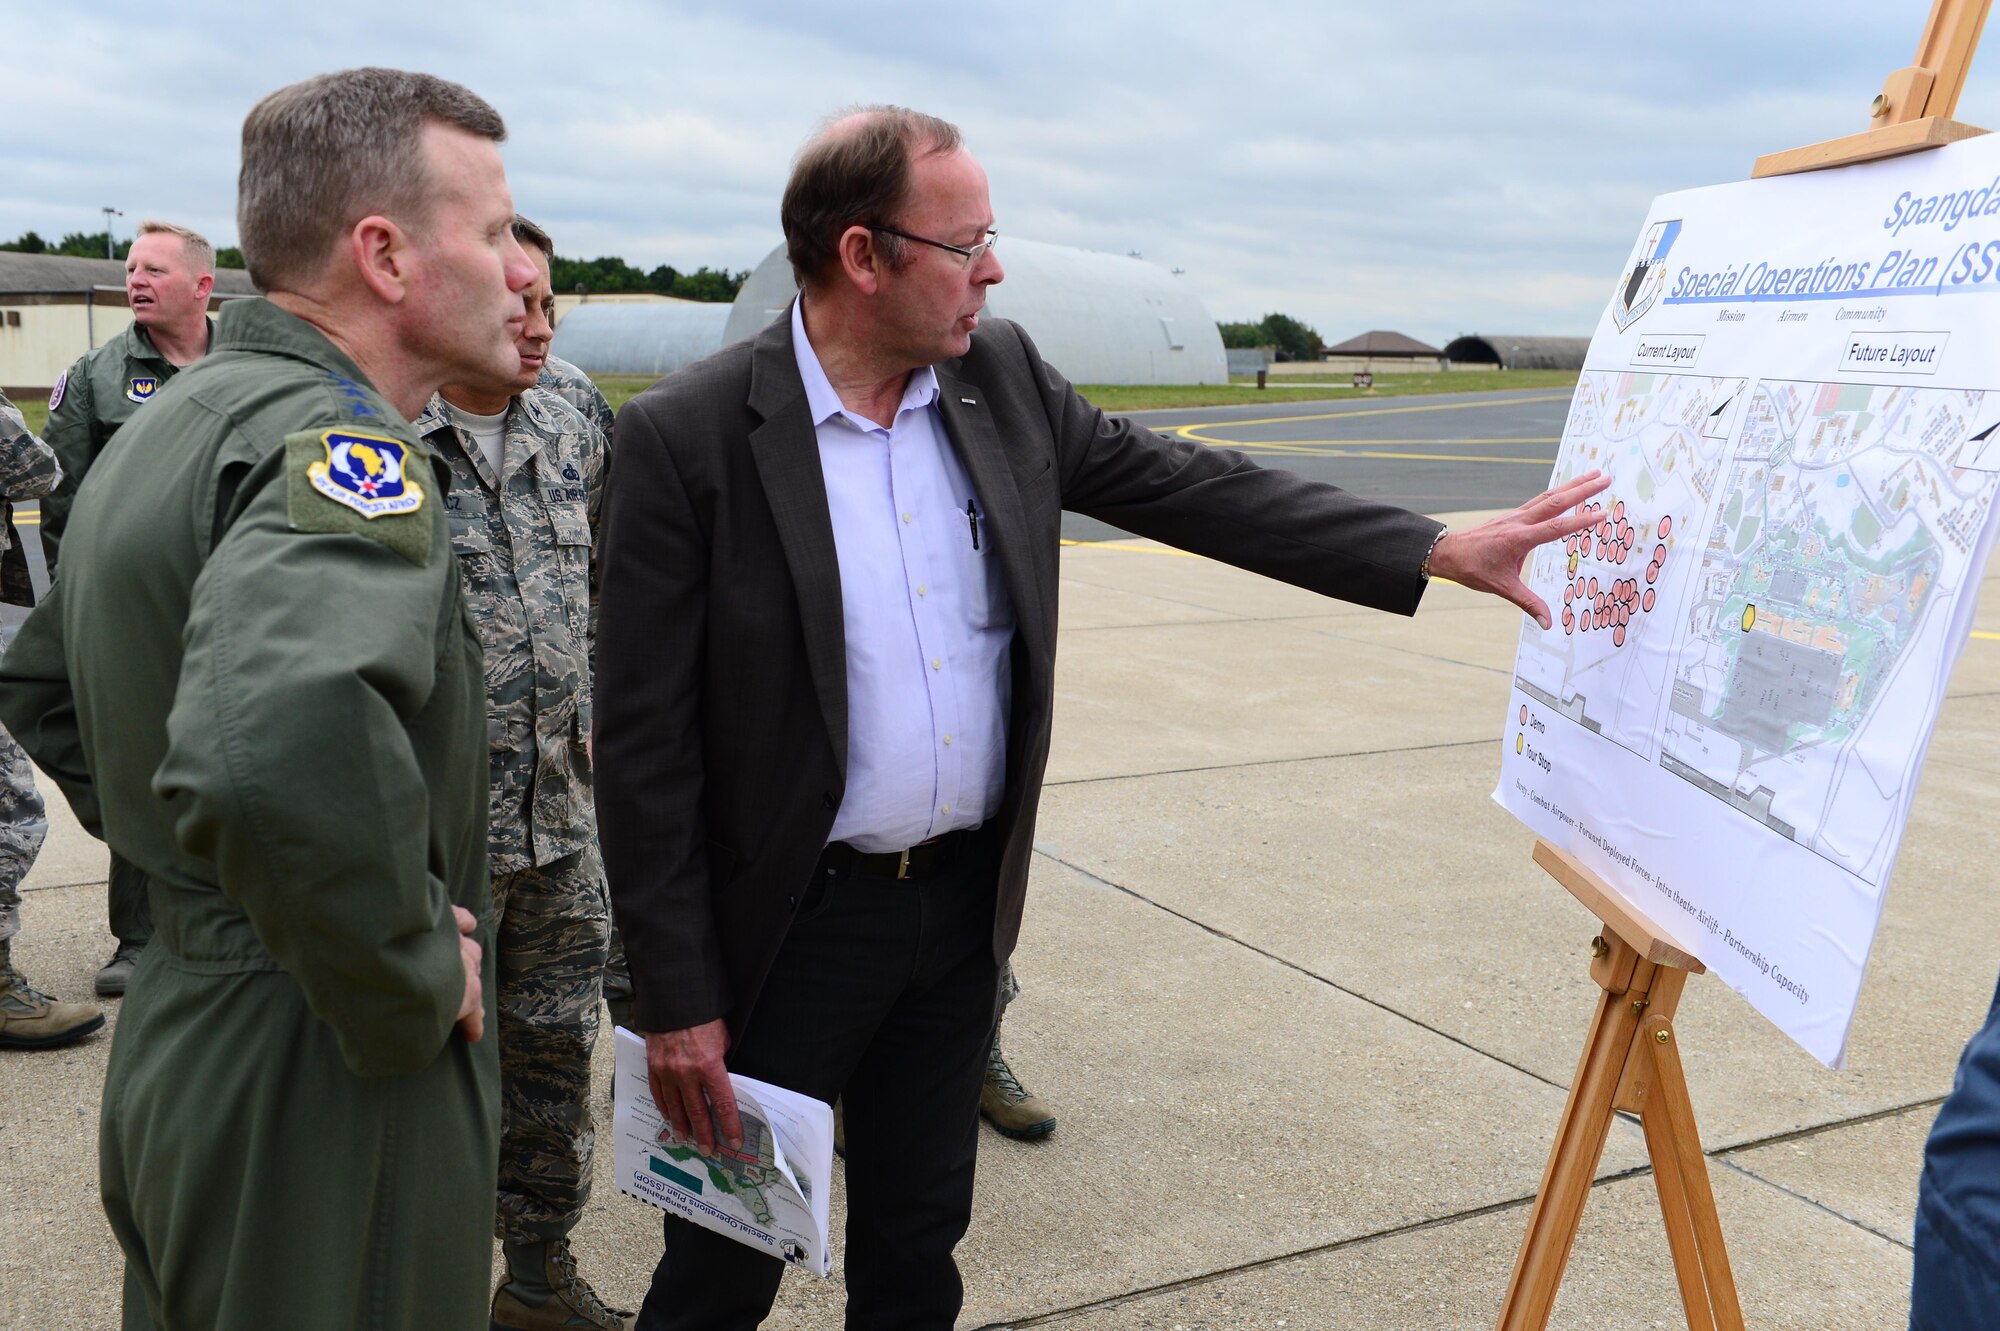 Gen. Tod D. Wolters, U.S. Air Forces in Europe and Air Forces Africa commander, left, receives a brief on constructional development while visiting Spangdahlem Air Base, Germany, Oct. 6, 2016. Wolters made his first visit to Spangdahlem since assuming command in August 2016, speaking to Airmen on the importance and uniqueness of their mission priorities. (U.S. Air Force photo by Senior Airman Joshua R. M. Dewberry)